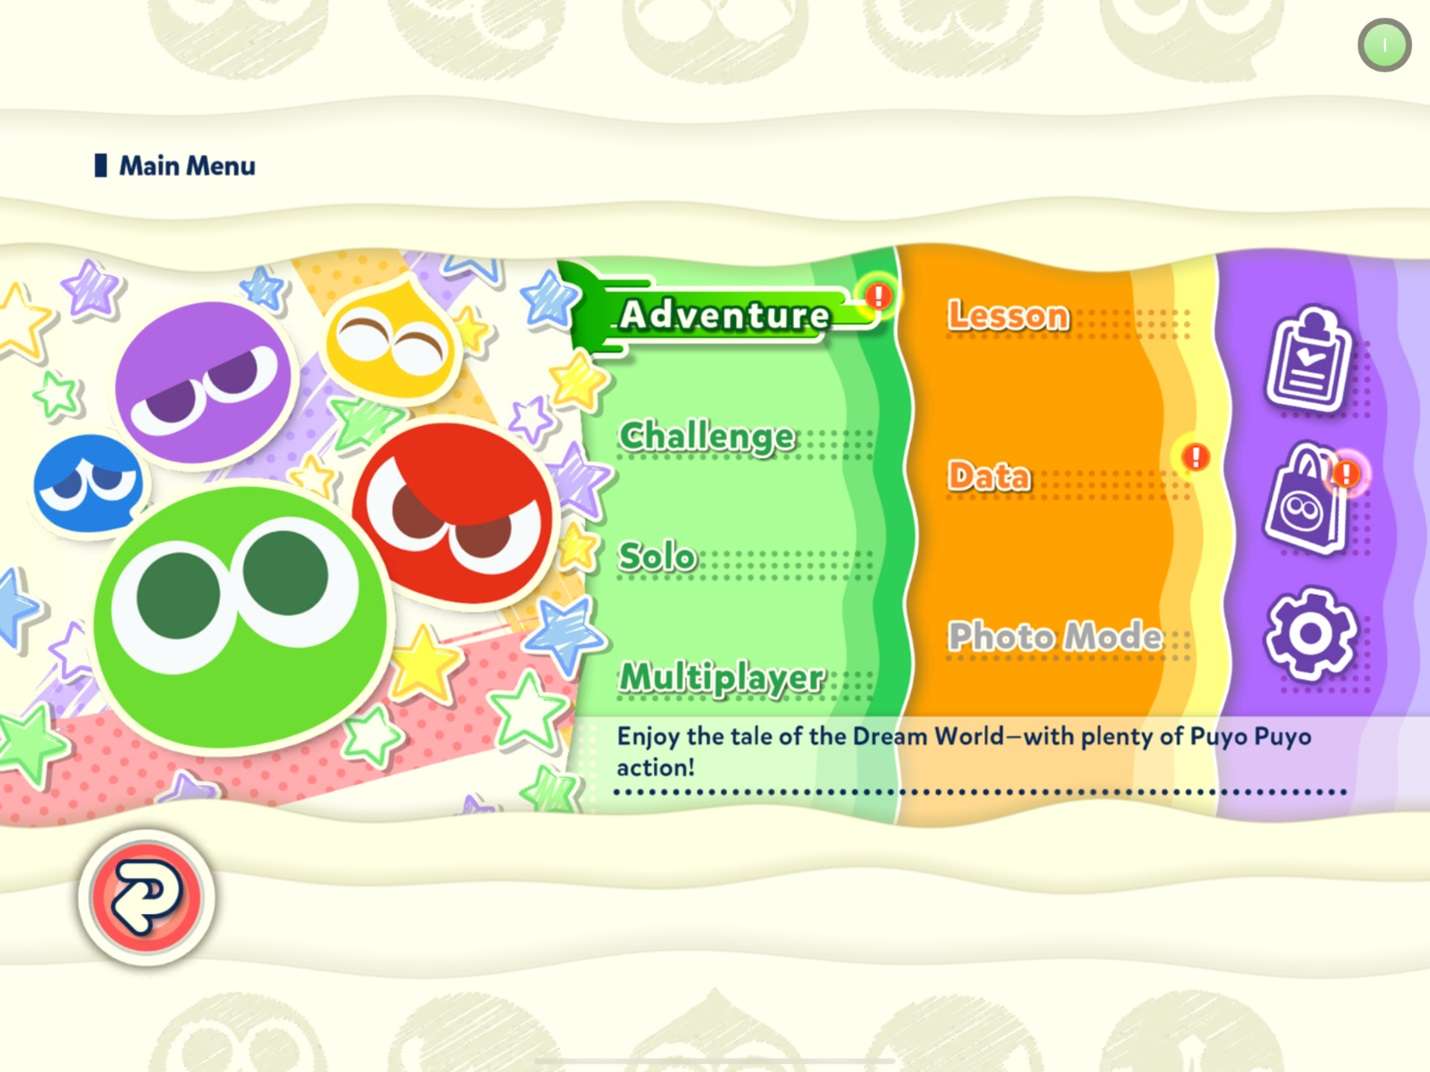 Puyo Puyo Puzzle Pop Review for iPad